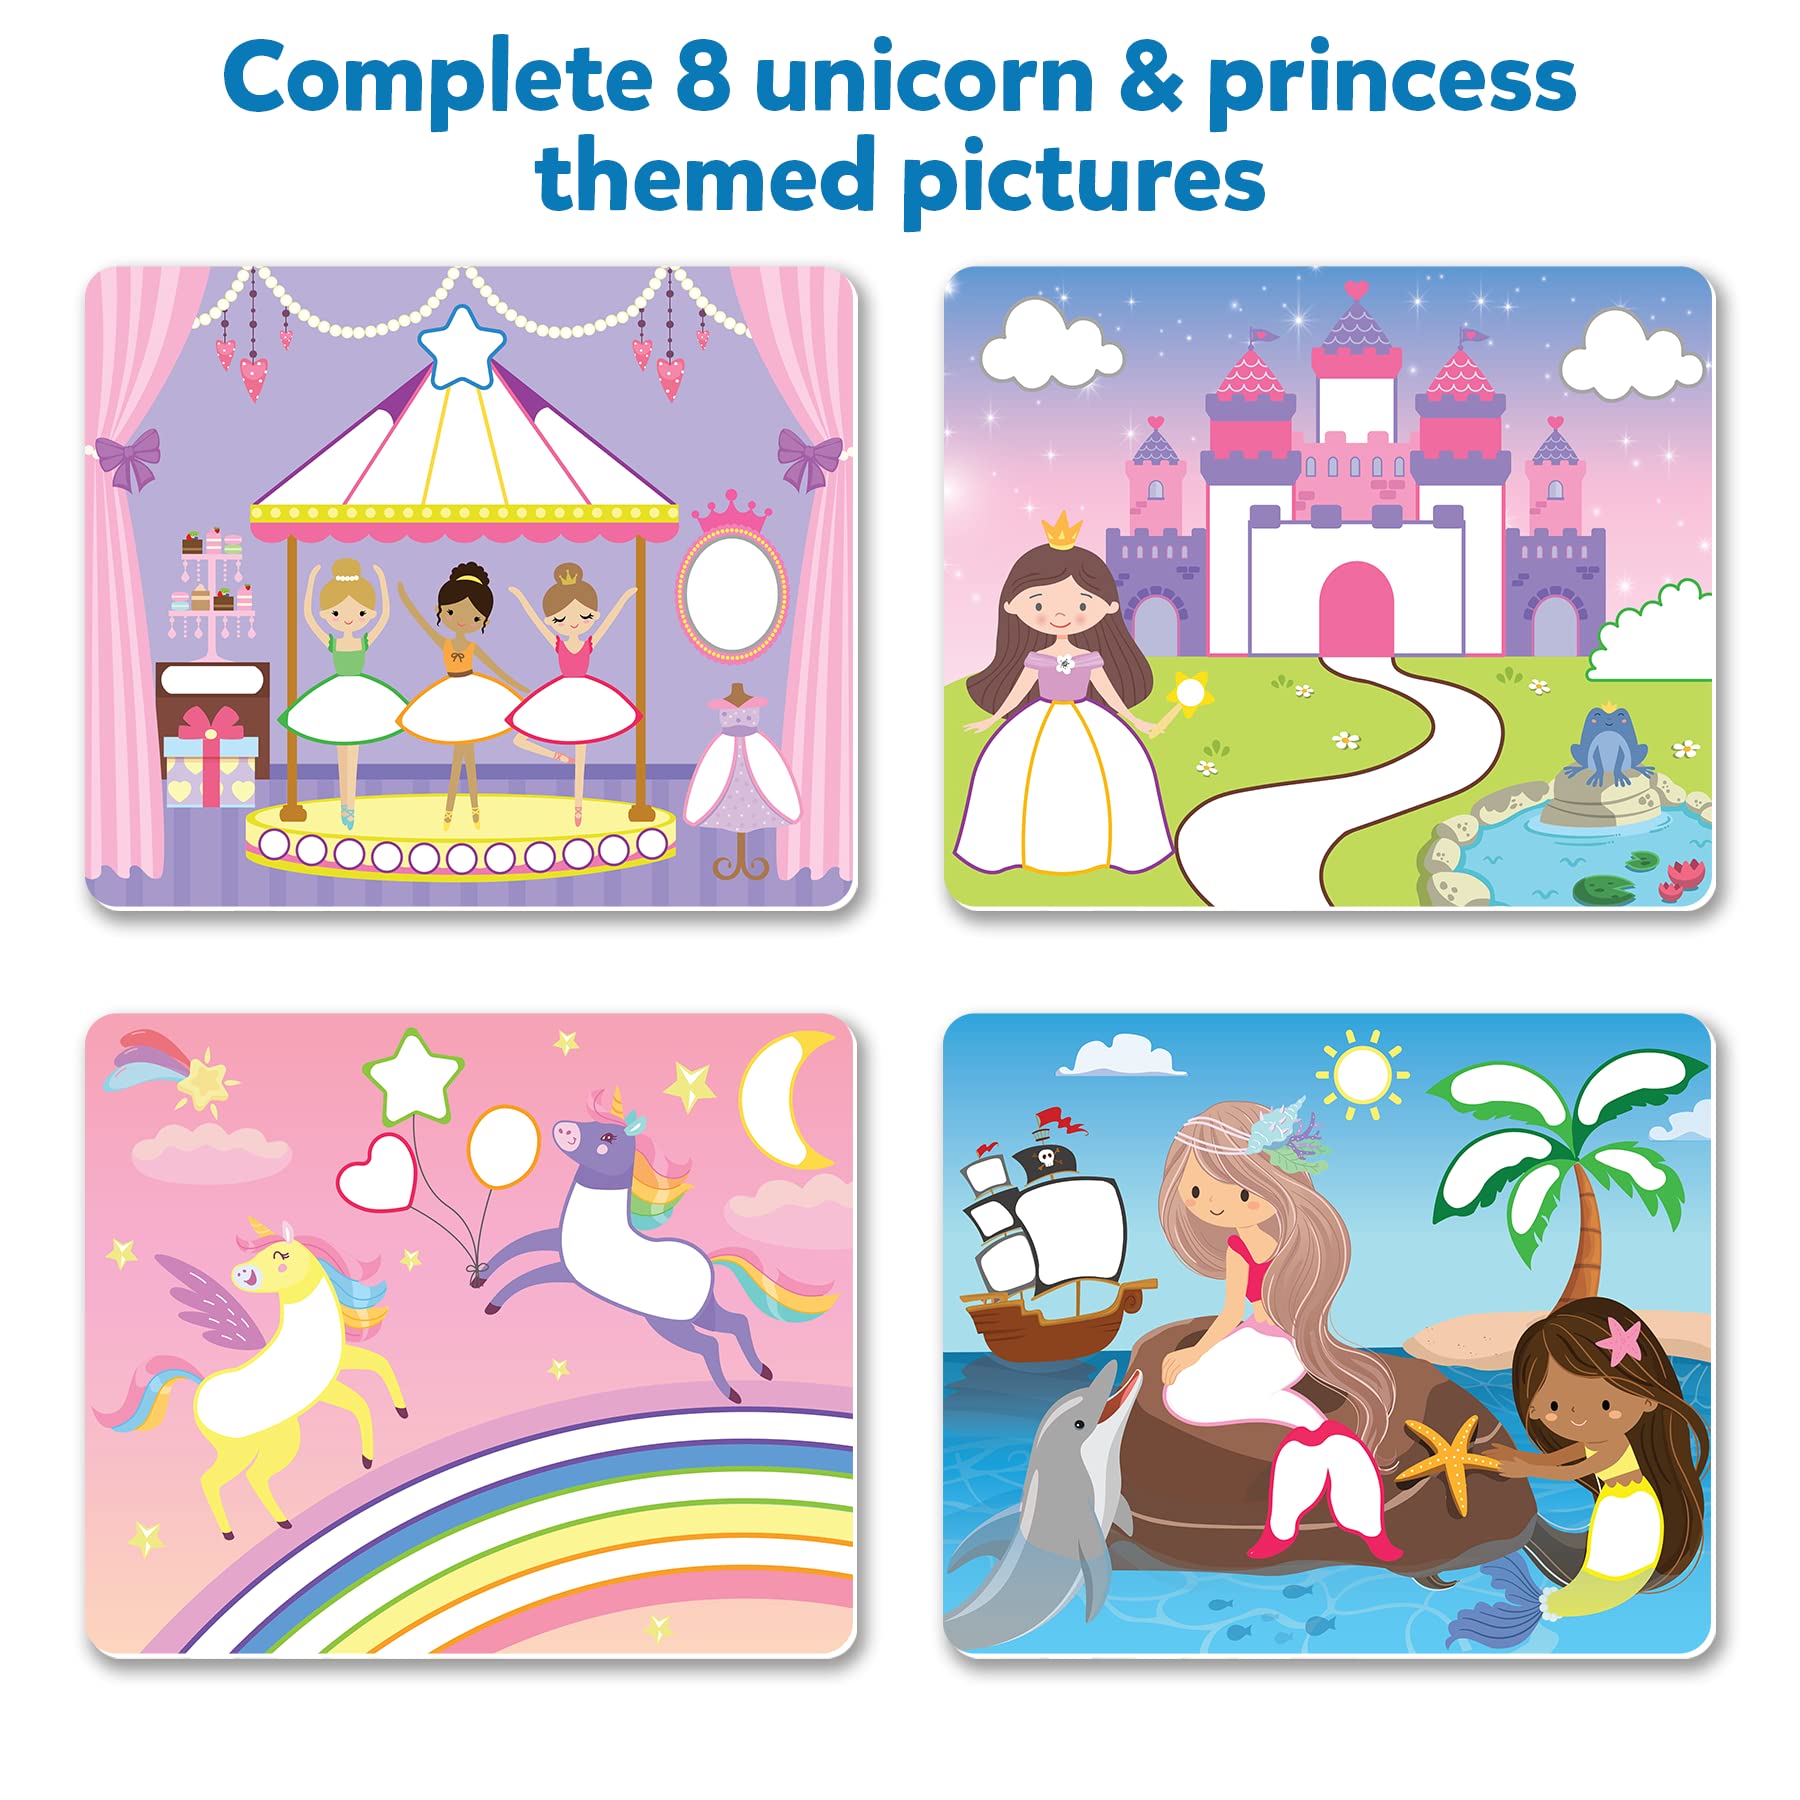 Skillmatics Art Activity Dot It - Unicorns & Princesses, No Mess Sticker Art for Kids, Craft Kits, DIY Activity, Gifts for Ages 3 to 7